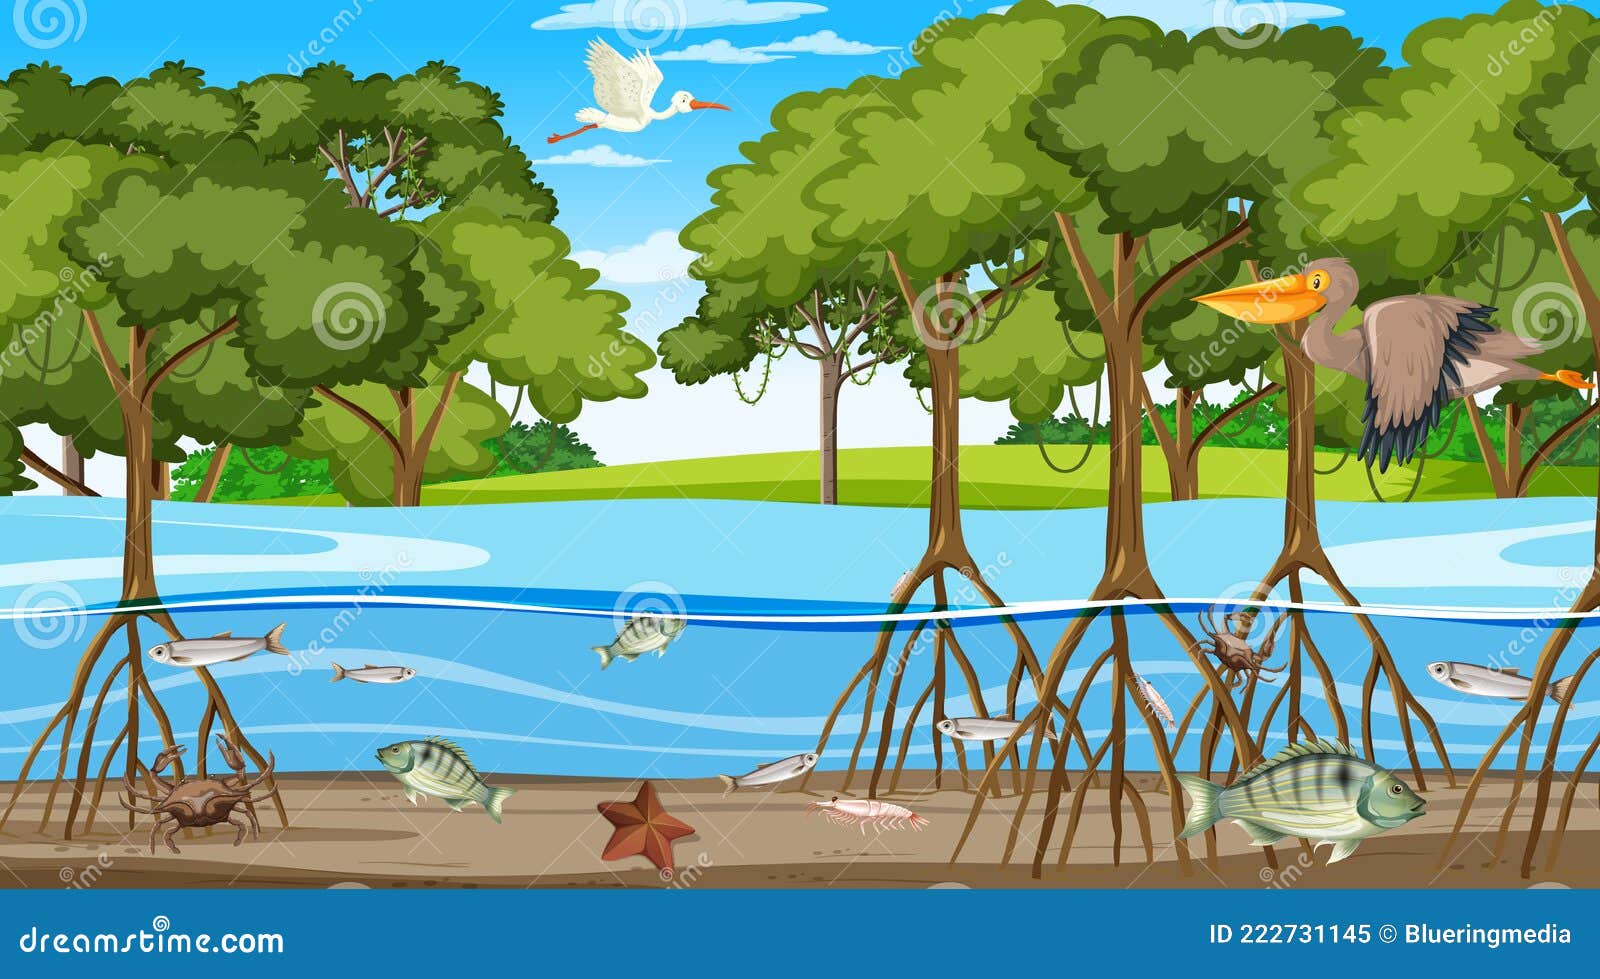 Animals Live in Mangrove Forest at Daytime Scene Stock Vector -  Illustration of color, background: 222731145